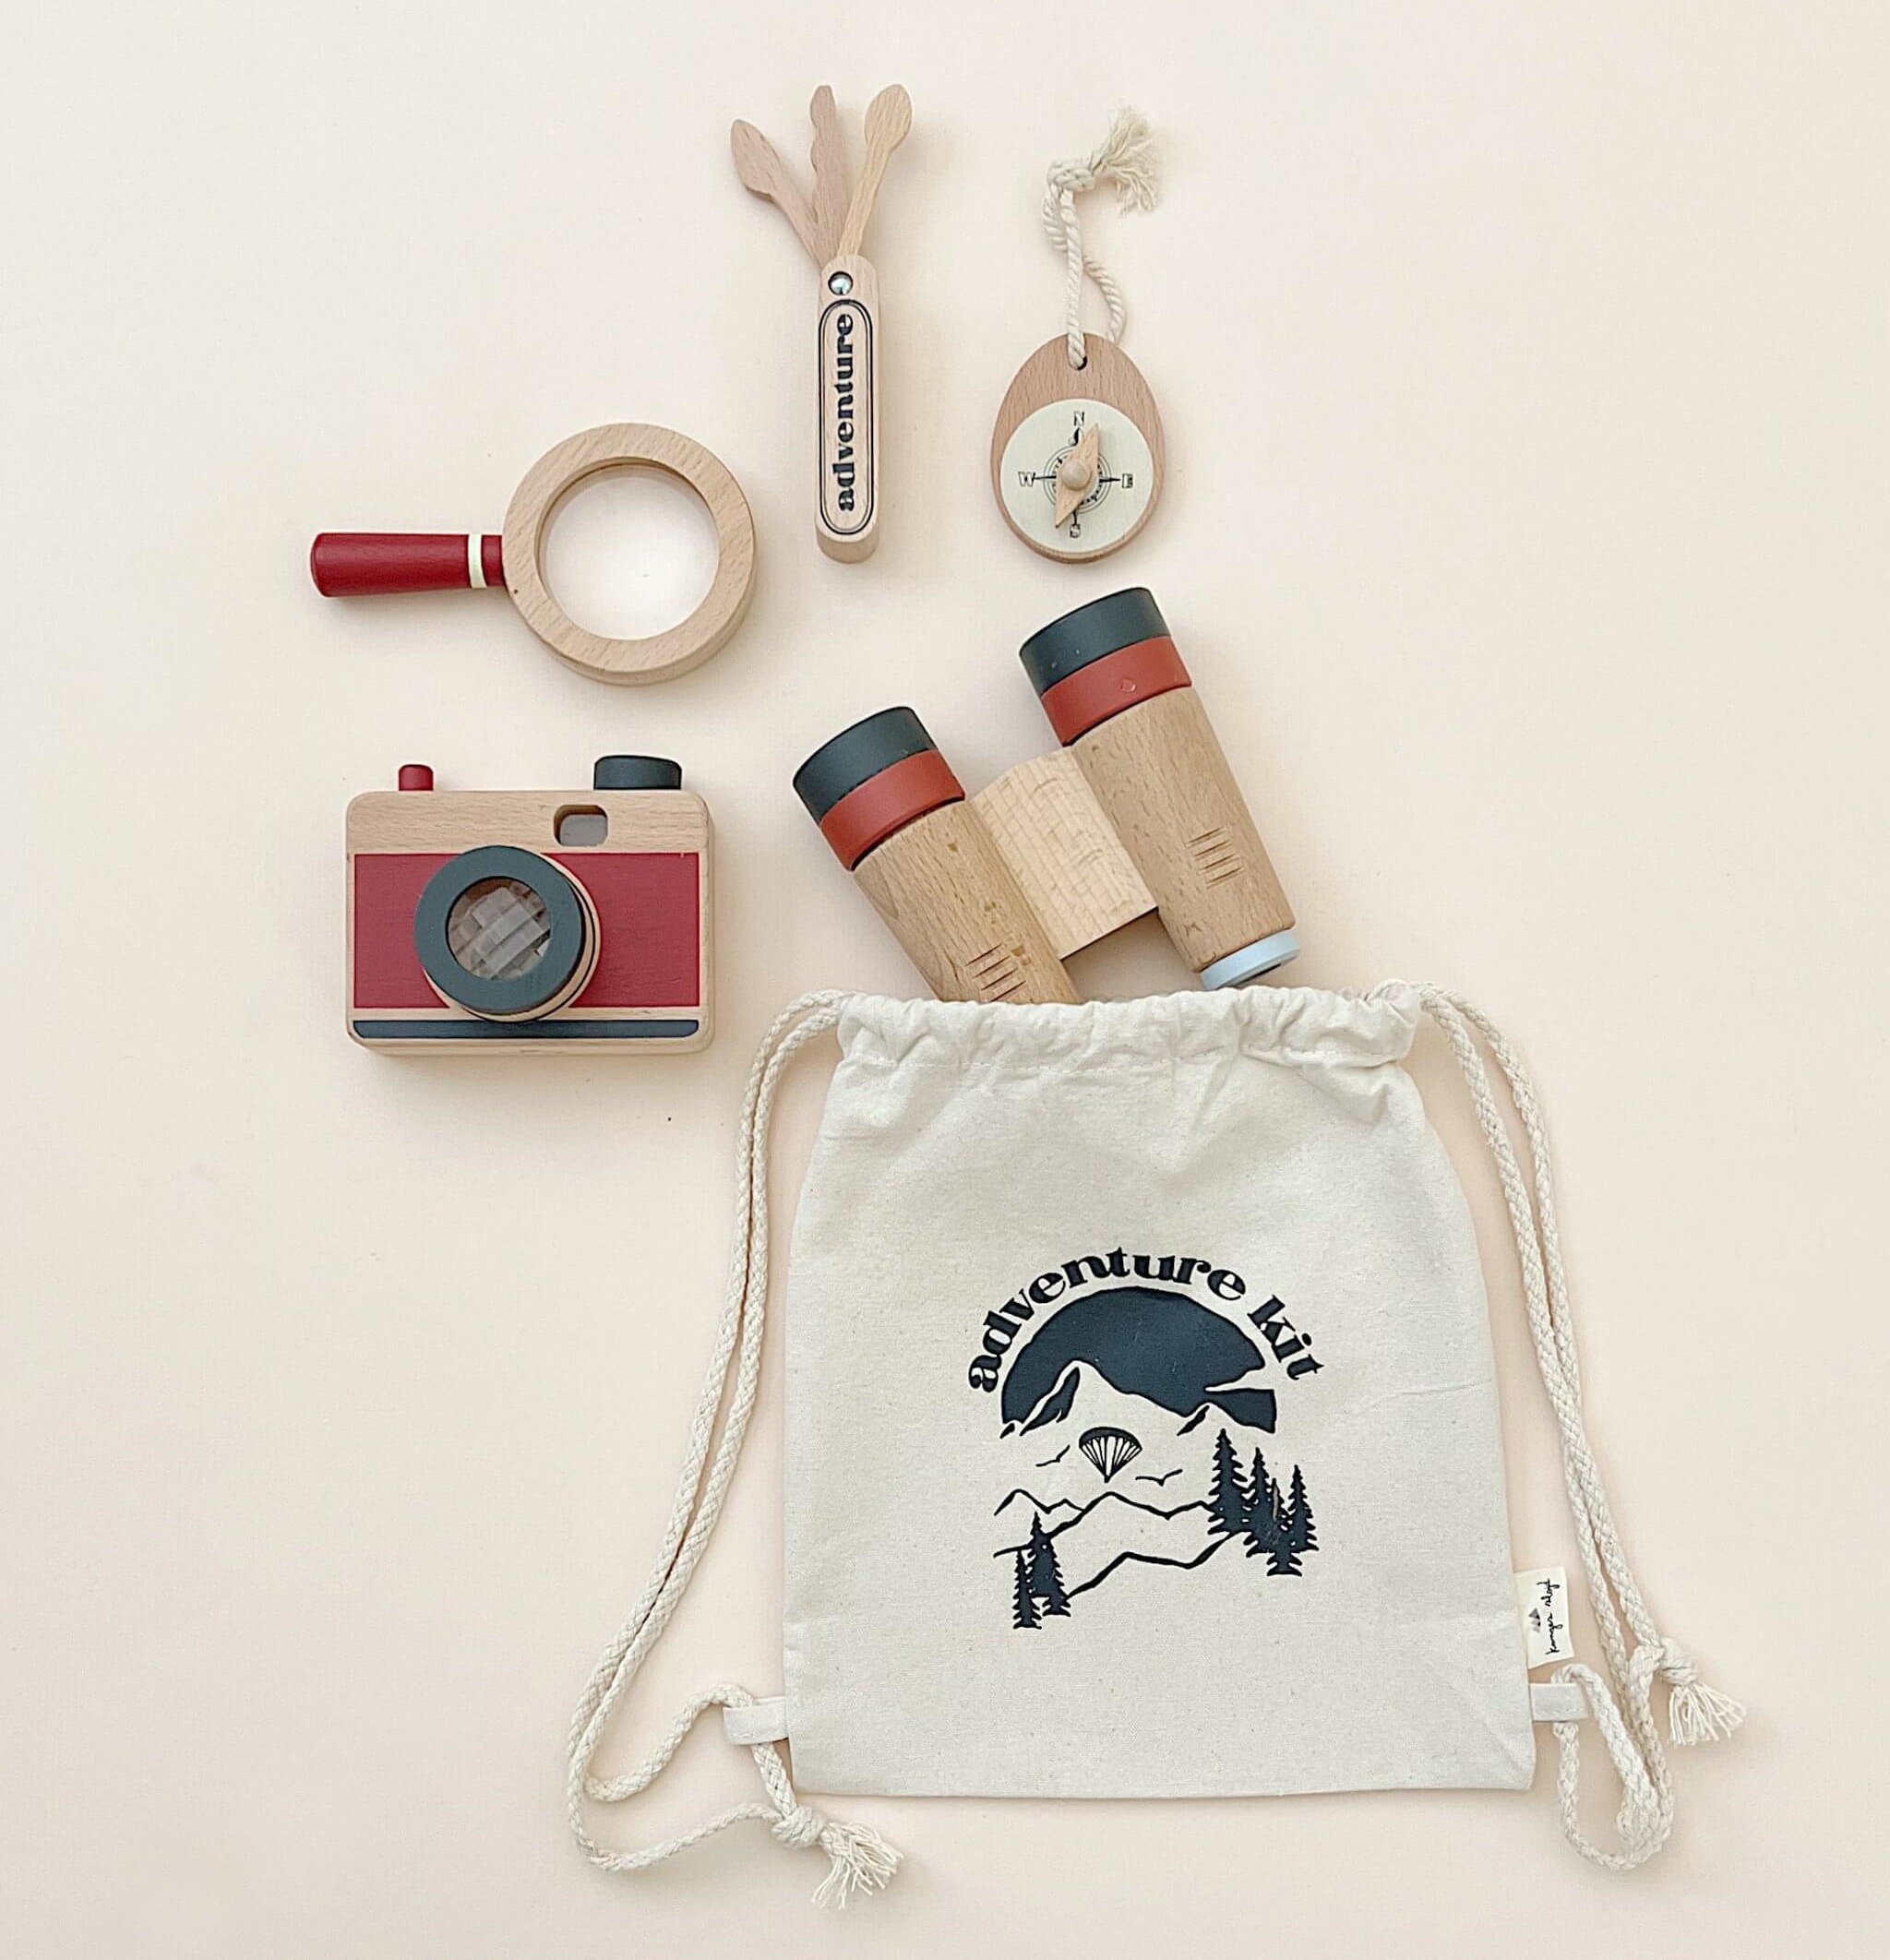 Odin Parker Wooden Explorer Kit with a toy camera, compass, binoculars, magnifying glass and bag.